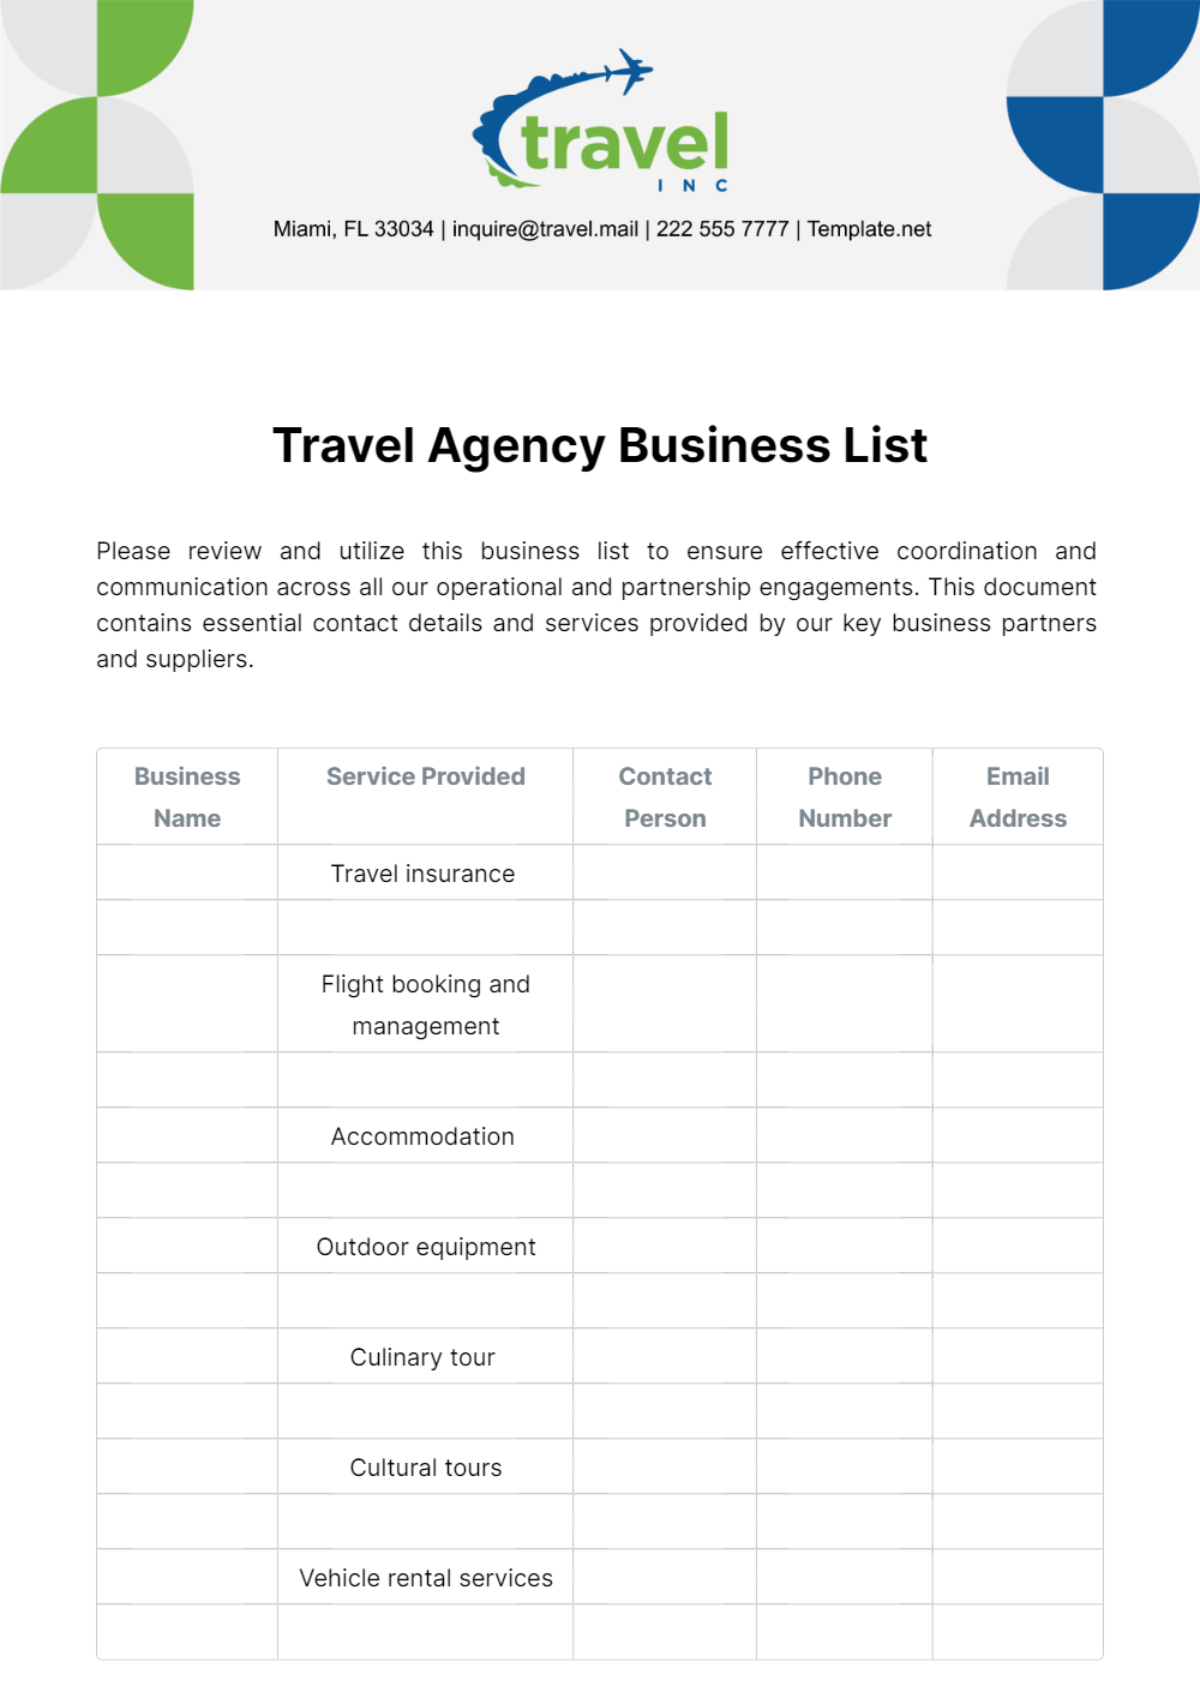 Travel Agency Business List Template